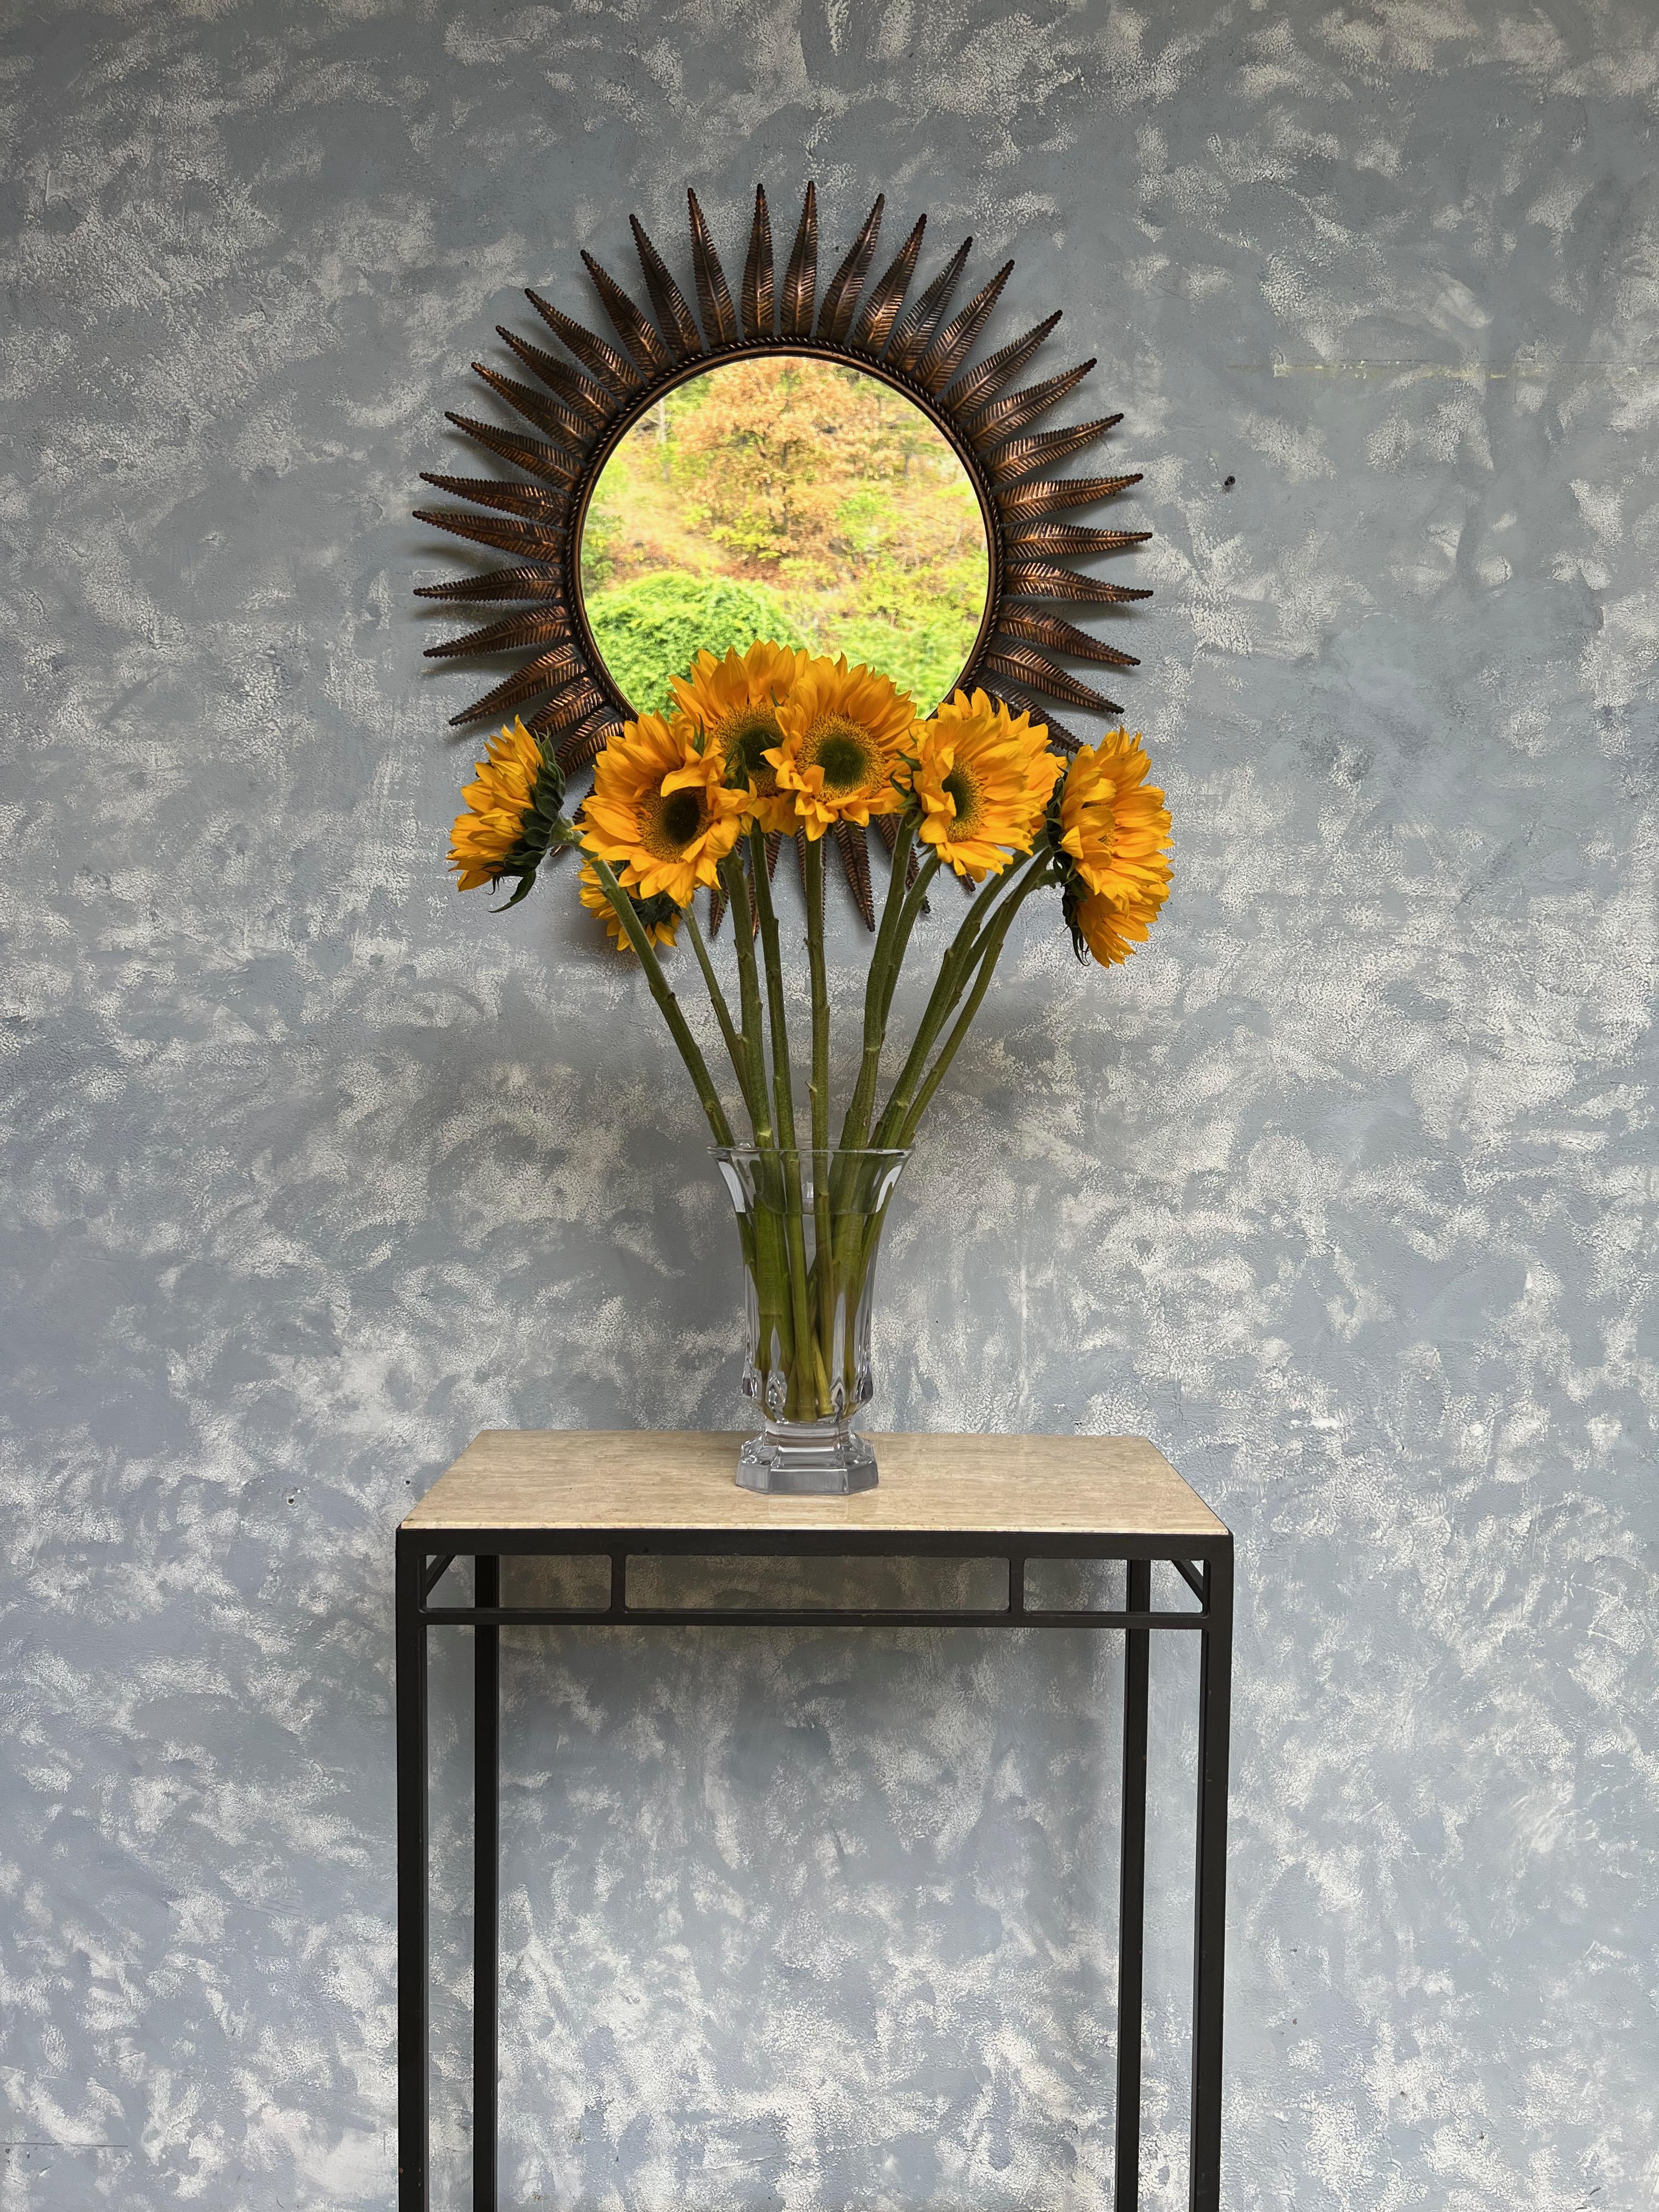 This large Spanish round copper plated mirror from the 1950s boasts a wonderfully proportioned mid century sunburst design with 40 evenly spaced rays, or leaves, encircling a braided interior frame. The metal showcases a richly patinated copper